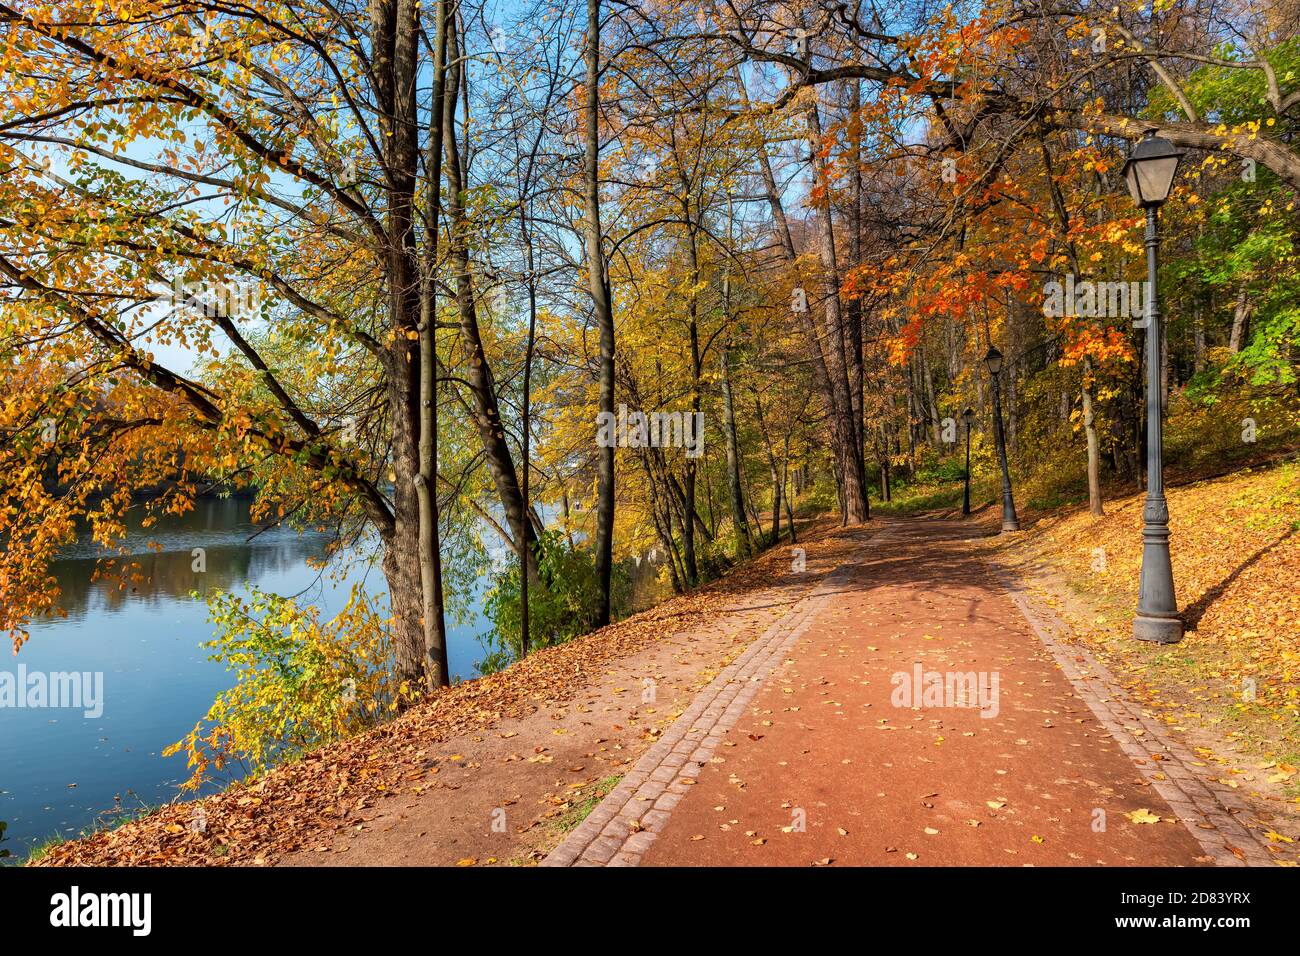 Autumn alley in a park with colorful leaves Stock Photo